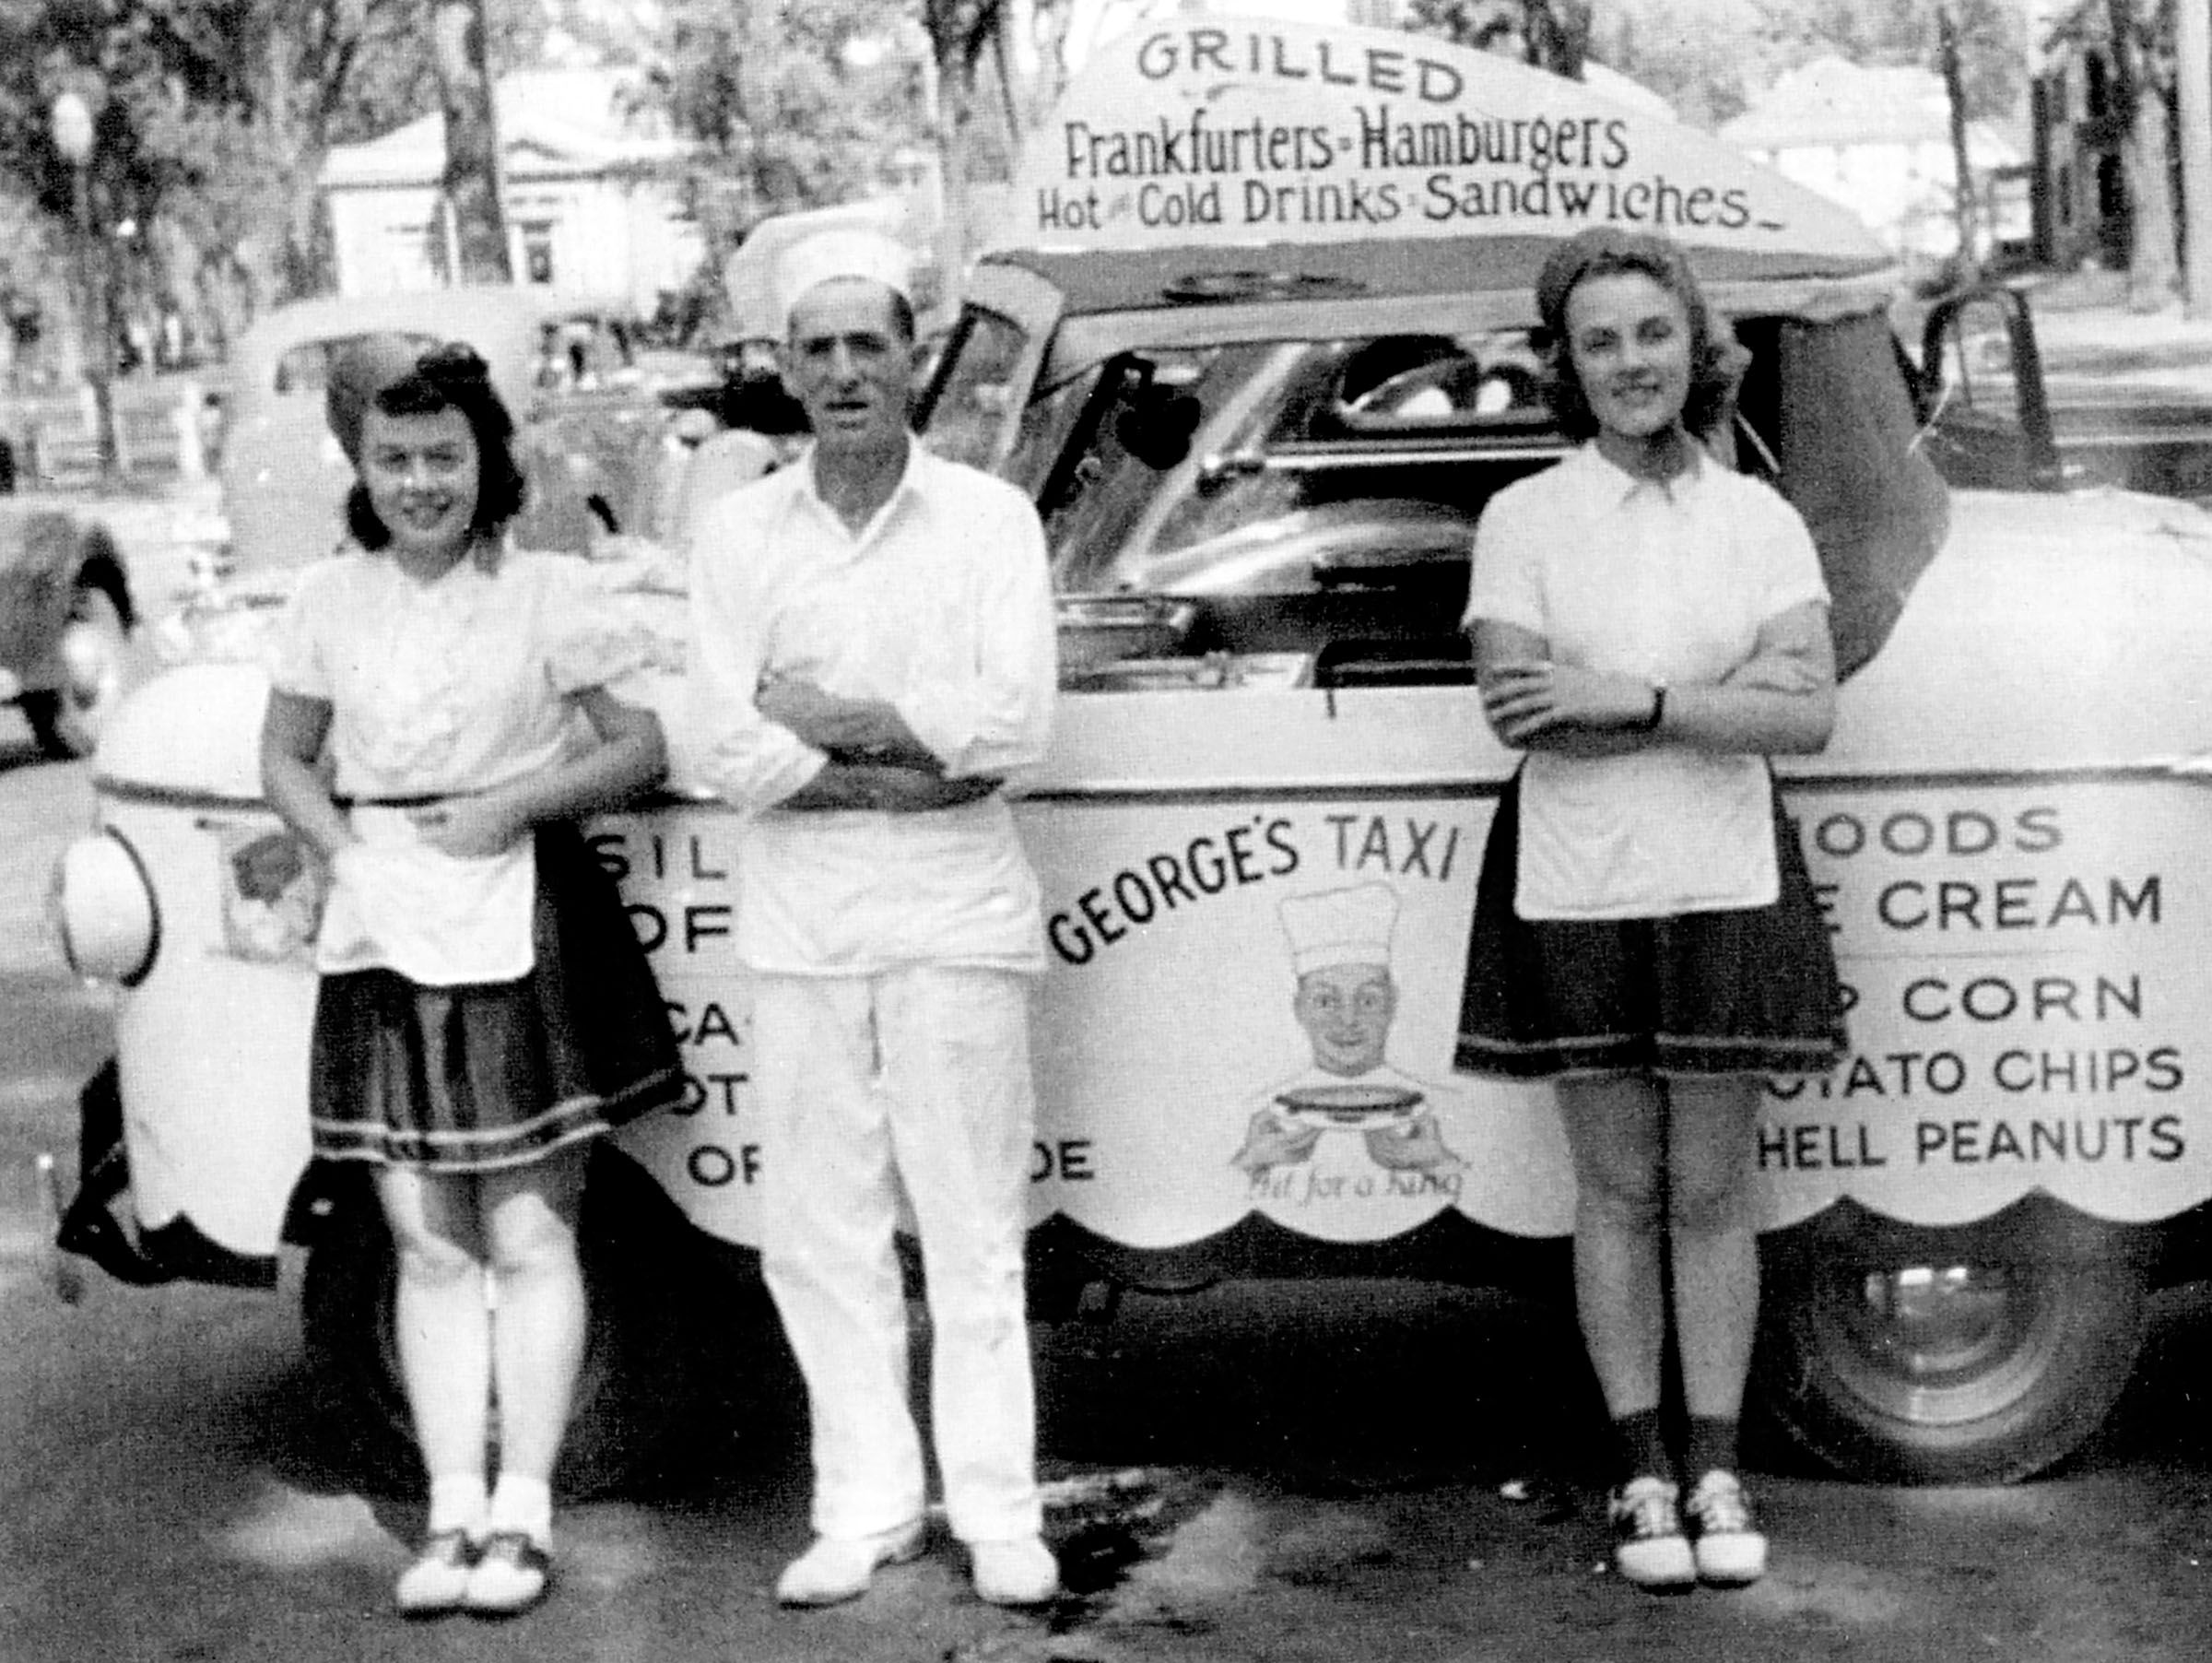 George Scarlett's Food Taxi in Lebanon, N.H., in the early 1940s. (Courtesy Lebanon Historical Society)